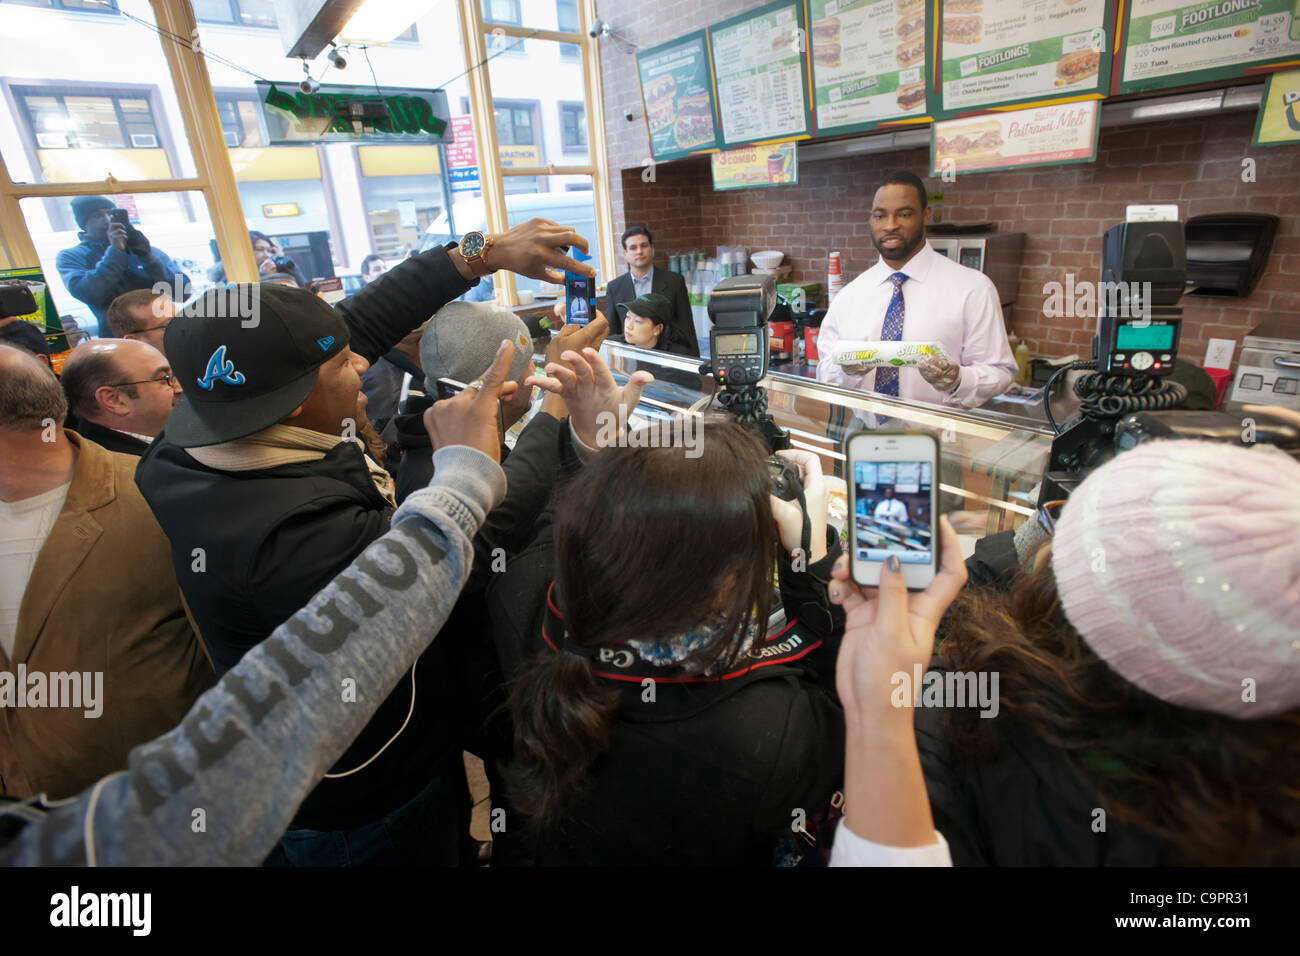 New York Giants defensive end Justin Tuck, fresh off of the Giants' Superbowl win, visits a Subway sandwich restaurant in New York on Thursday, February 9, 2012. The footballer surprised fans by preparing sandwiches and greeting them during the Subway FebruANY Footlong promotion. ( © Richard B. Levi Stock Photo